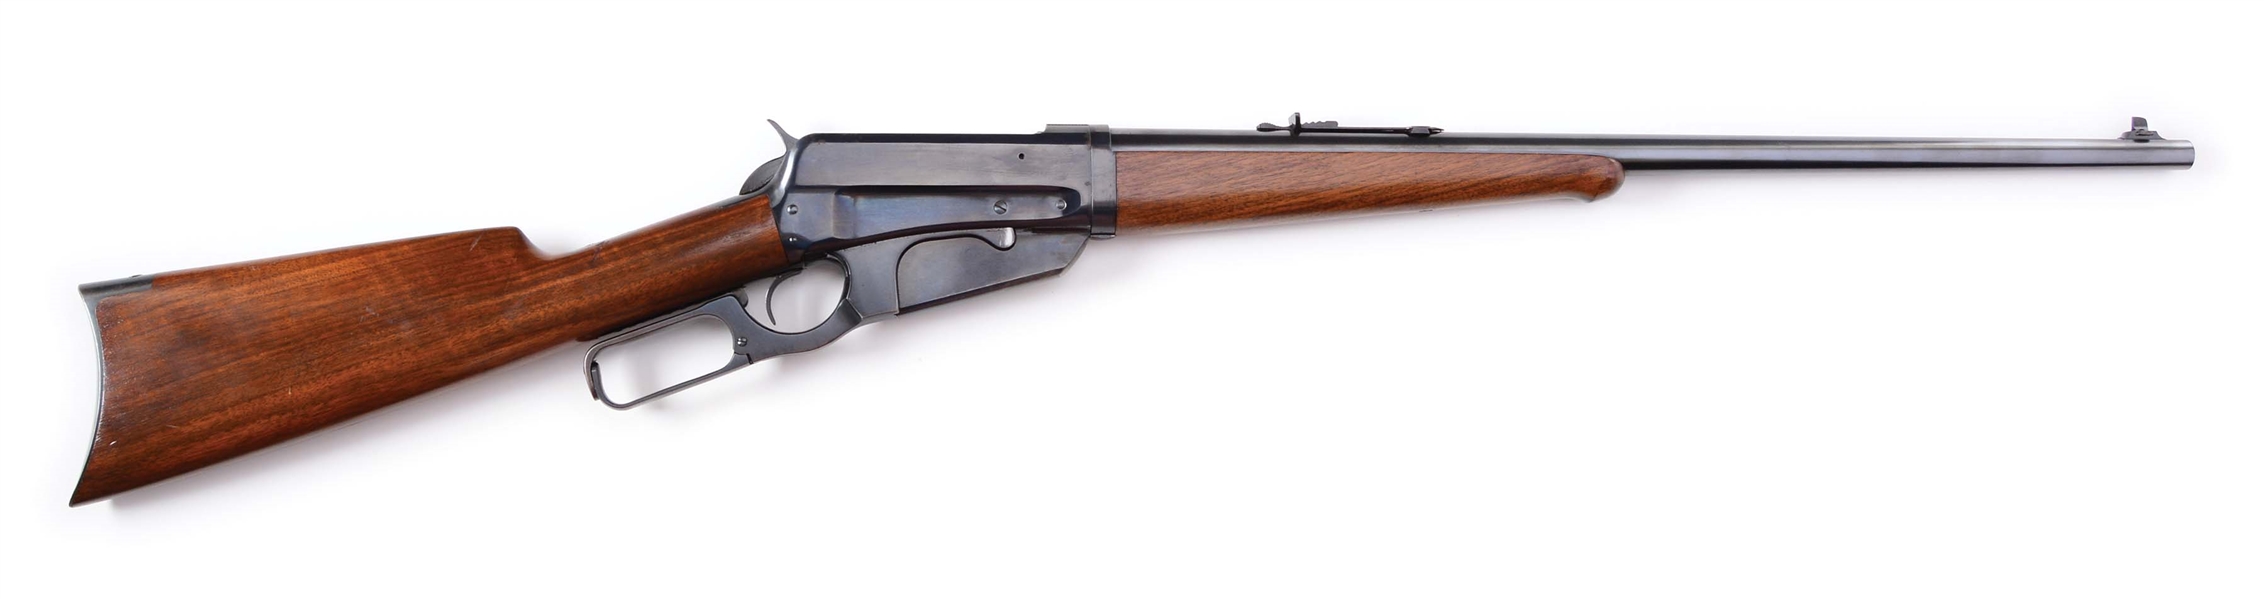 (C) NEAR NEW WINCHESTER MODEL 1895 TAKEDOWN LEVER ACTION RIFLE (1924).